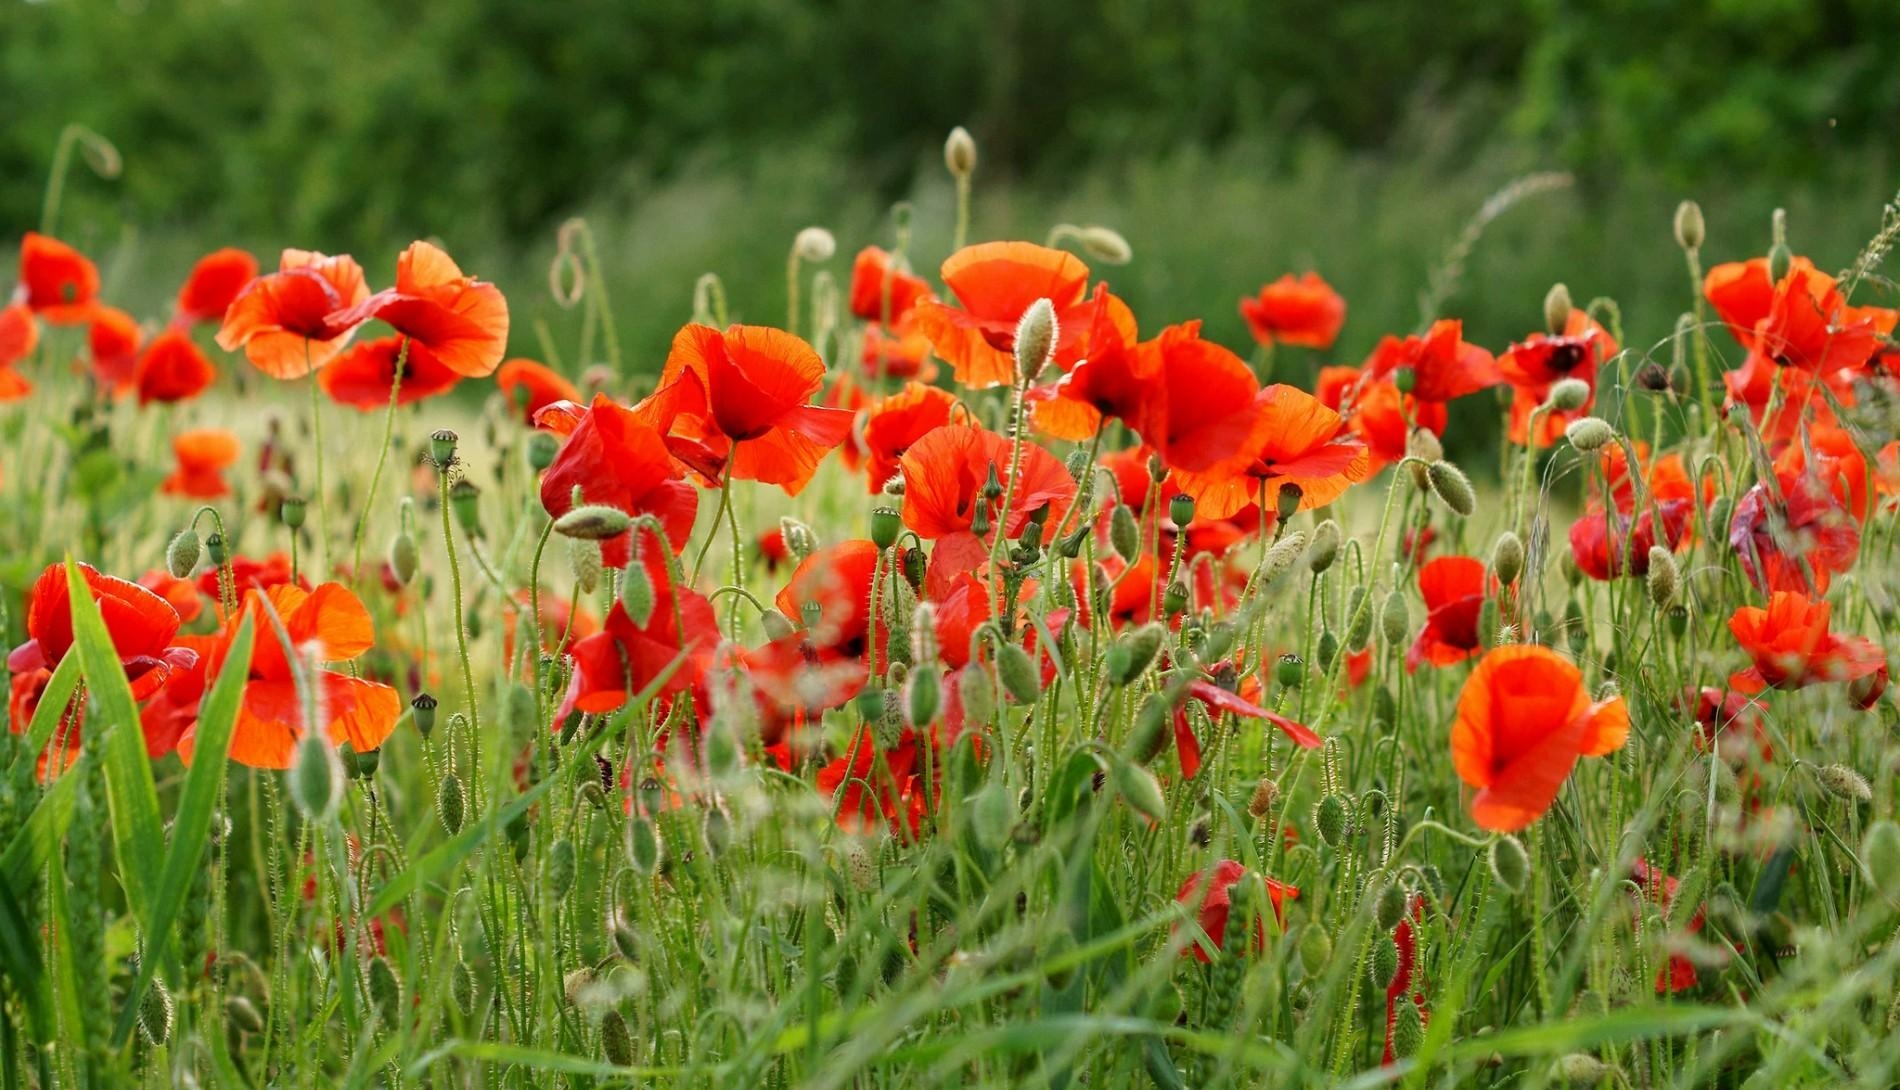 63269 download wallpaper flowers, poppies, summer, blur, smooth, greens, field screensavers and pictures for free